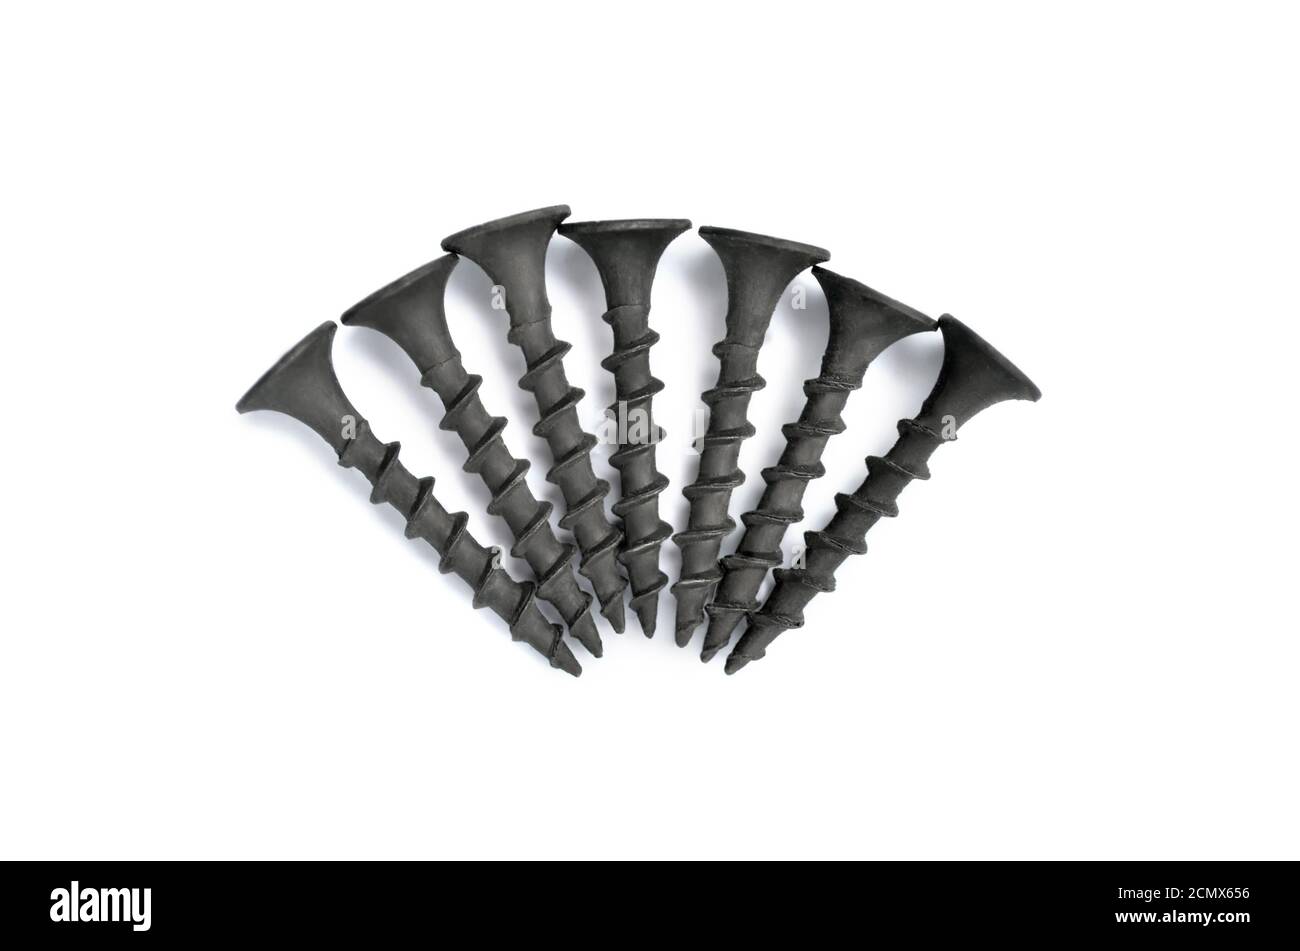 Black tapping screws for construction Stock Photo